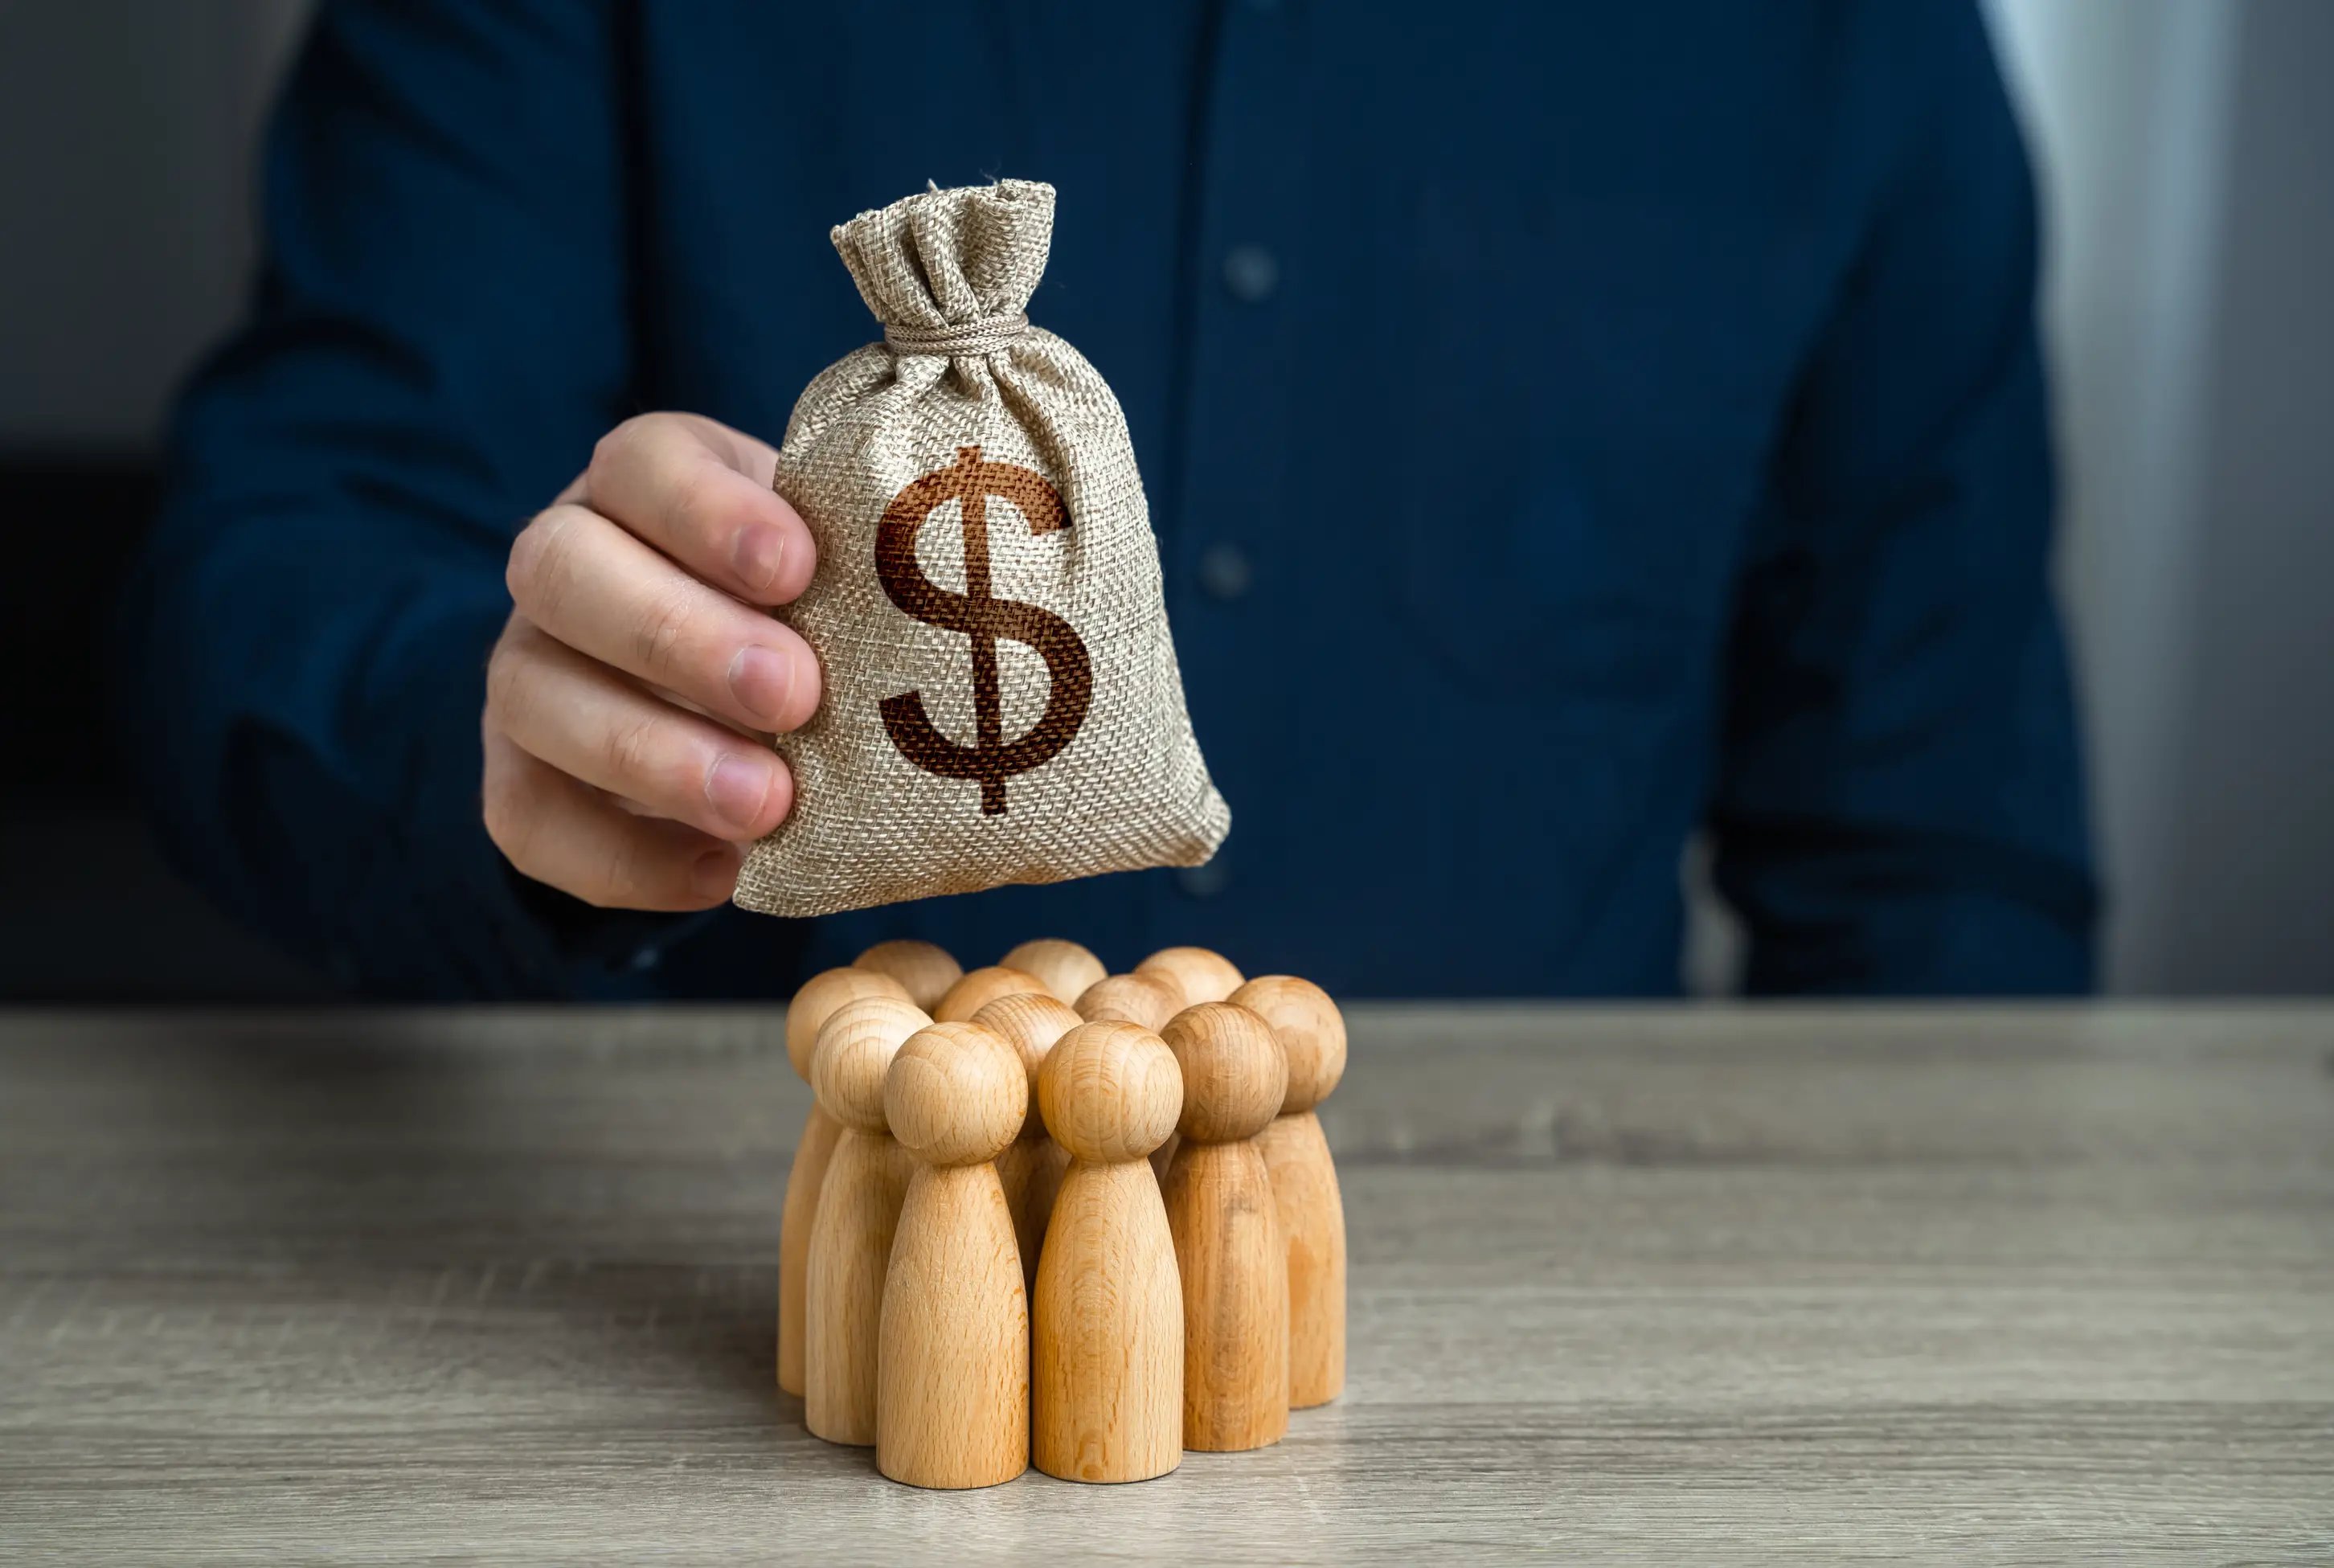 man holding money bag with dollar sign on top of wooden blocks symbolizing employee salary pay or bonus pay